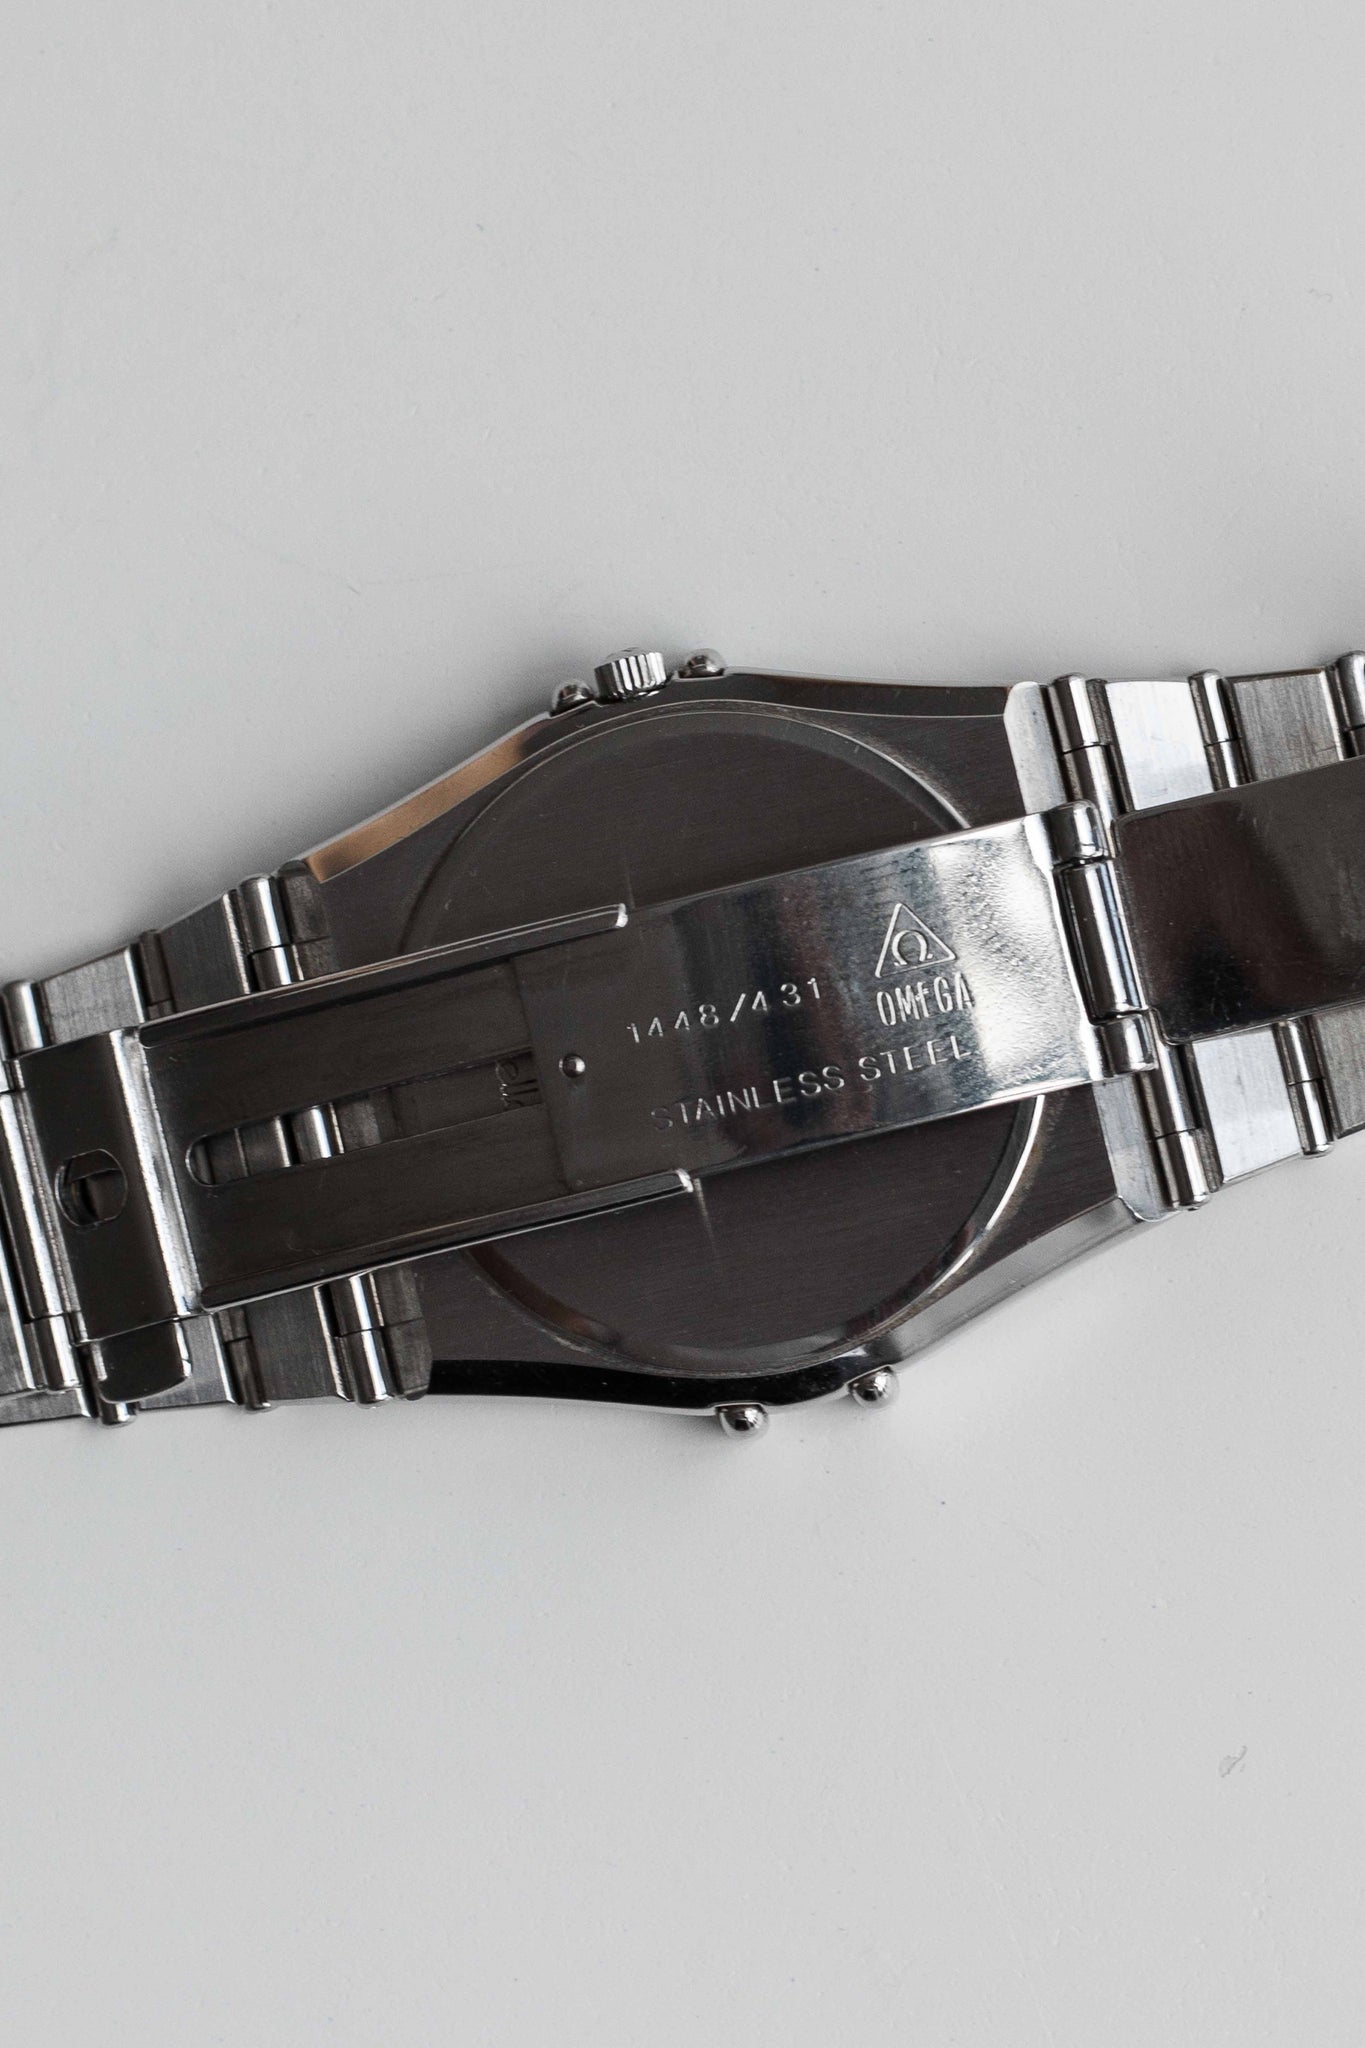 Omega Constellation Day-Date Ref. 1520.30 1980's